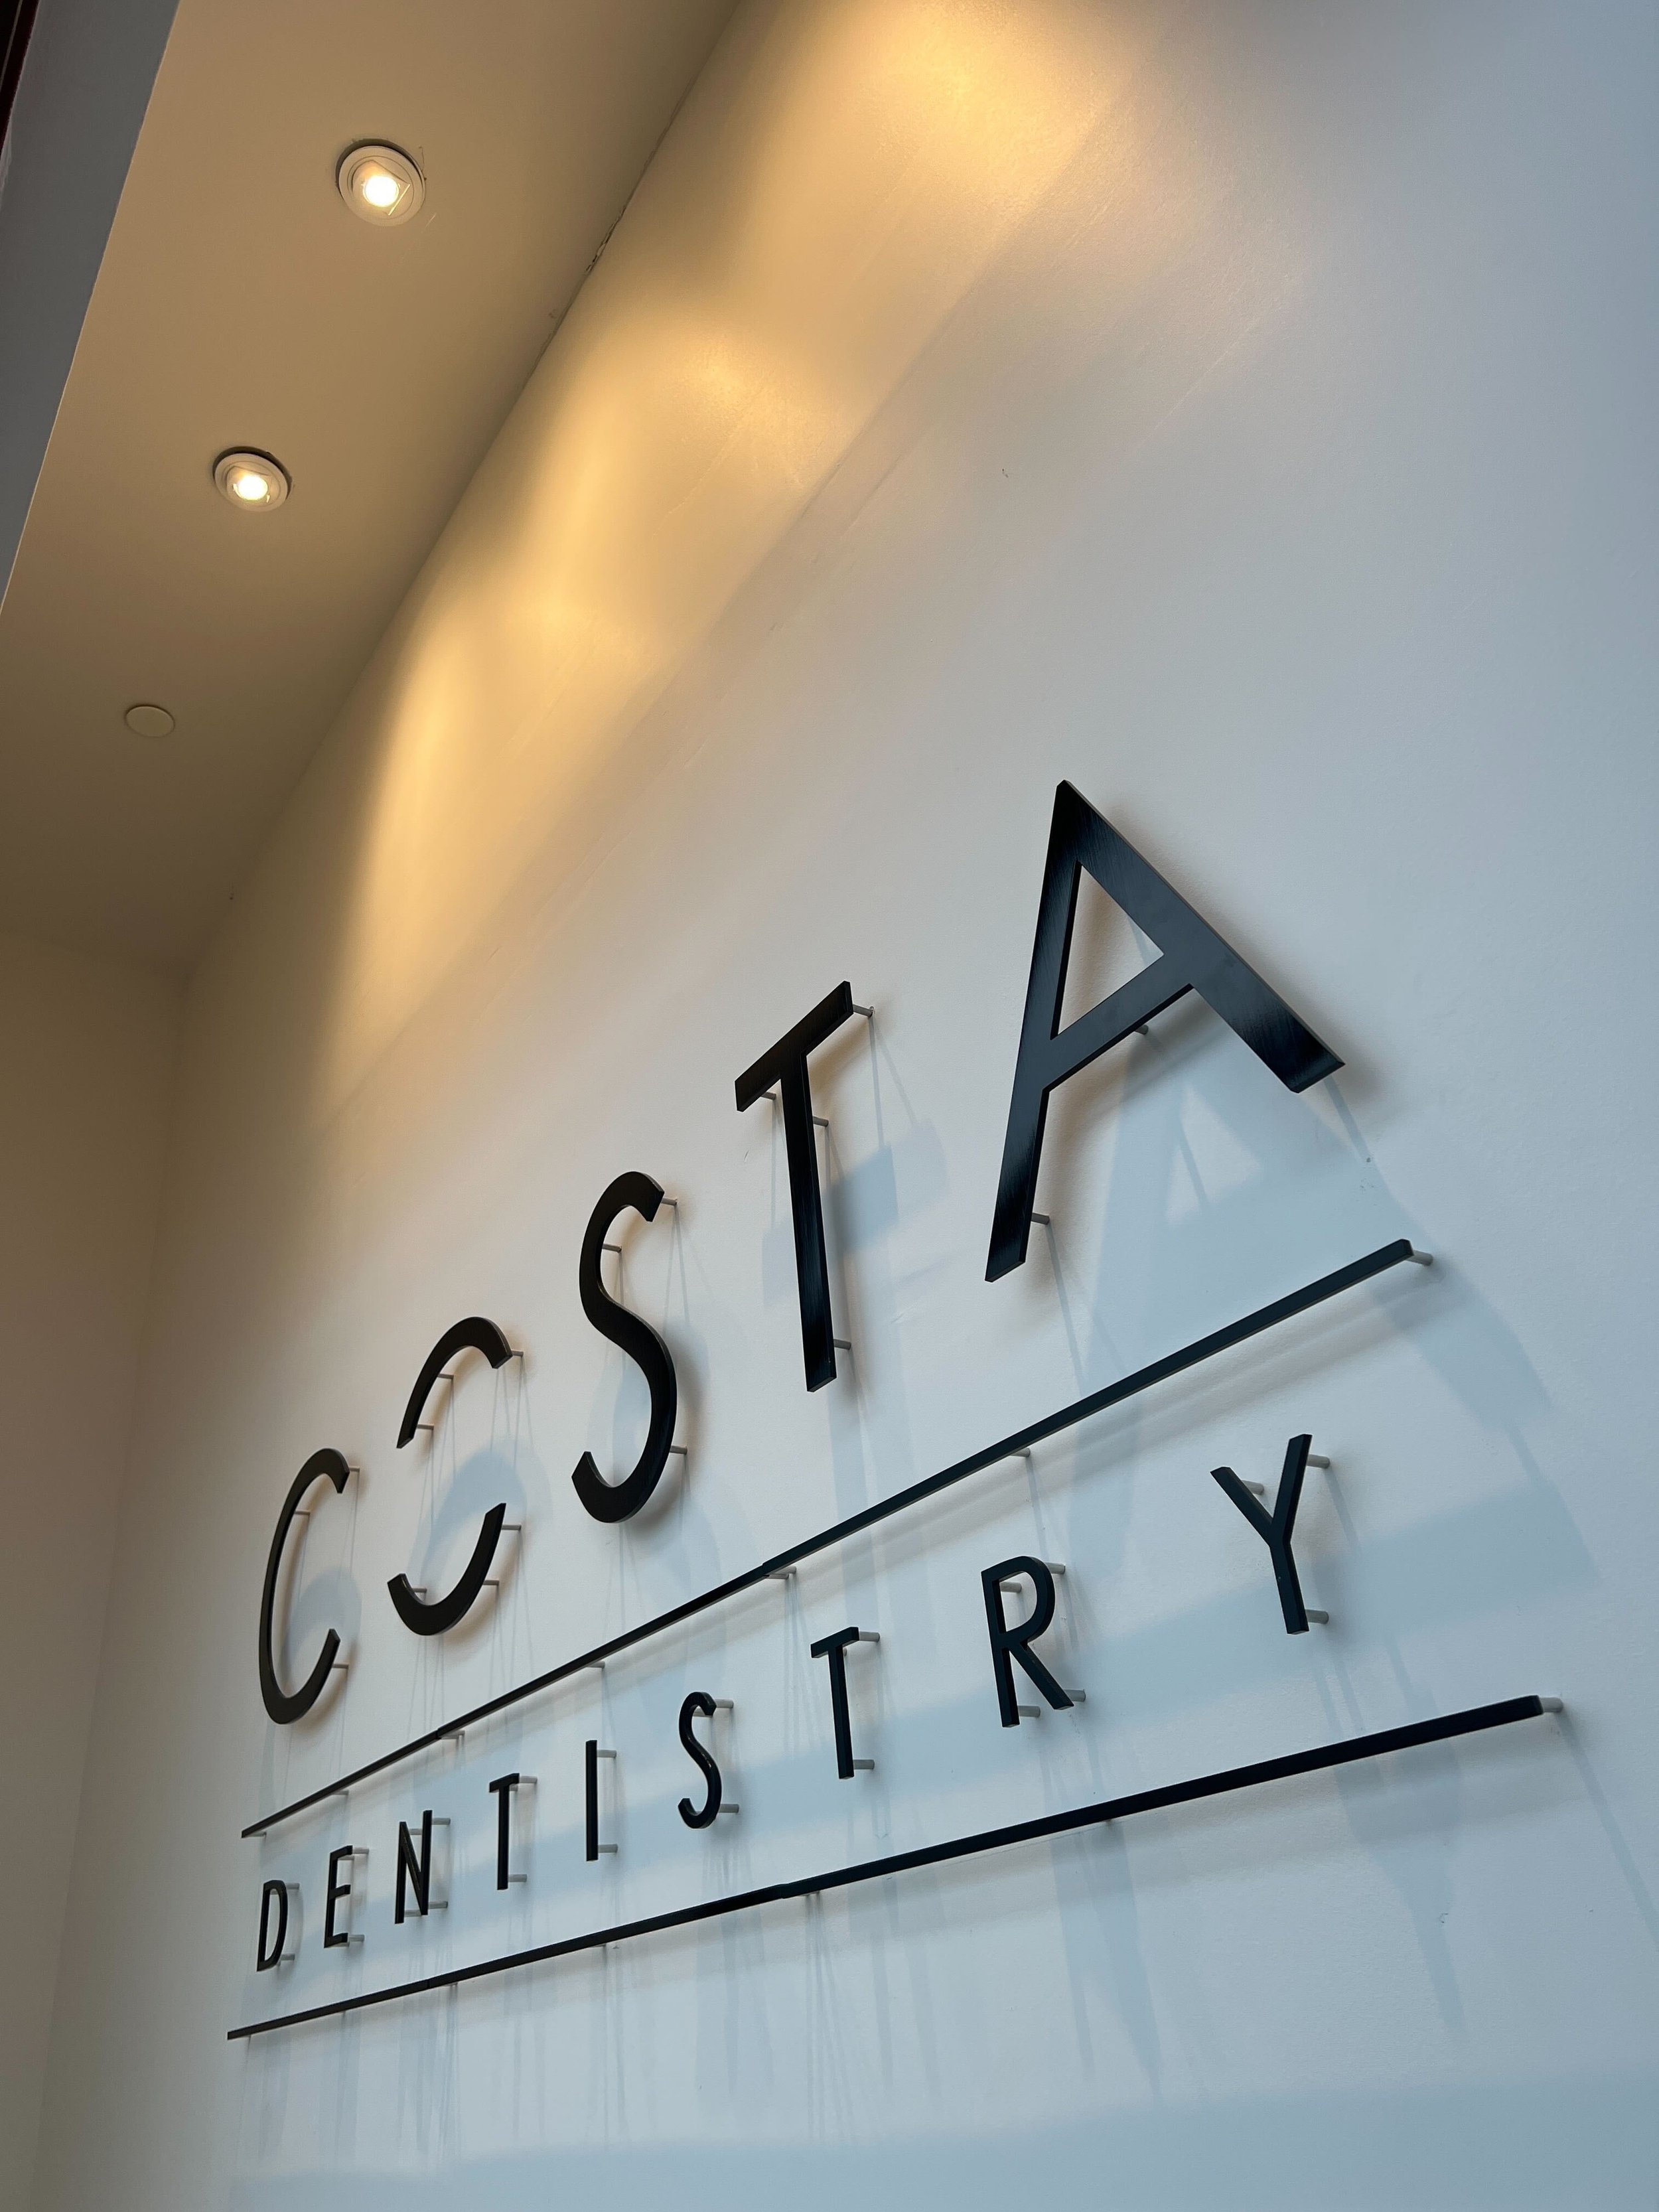 Costa Dentistry individual letters 04.jpg